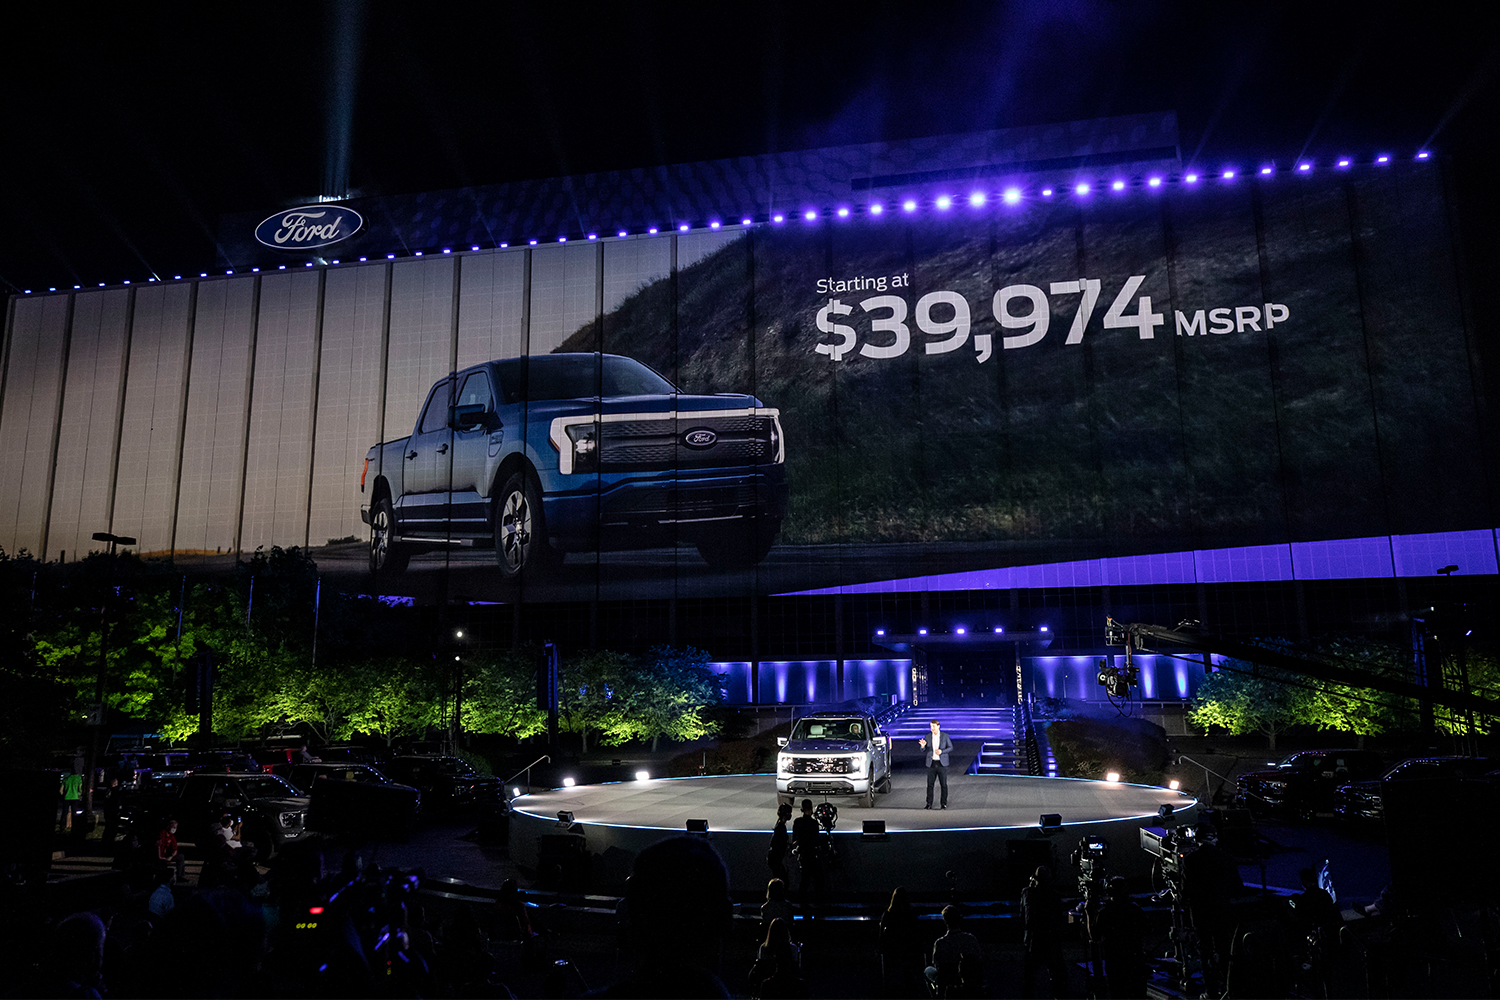 The F-150 Lightning at the unveiling event at Ford World Headquarters in Dearborn, Michigan, on May 19, 2021